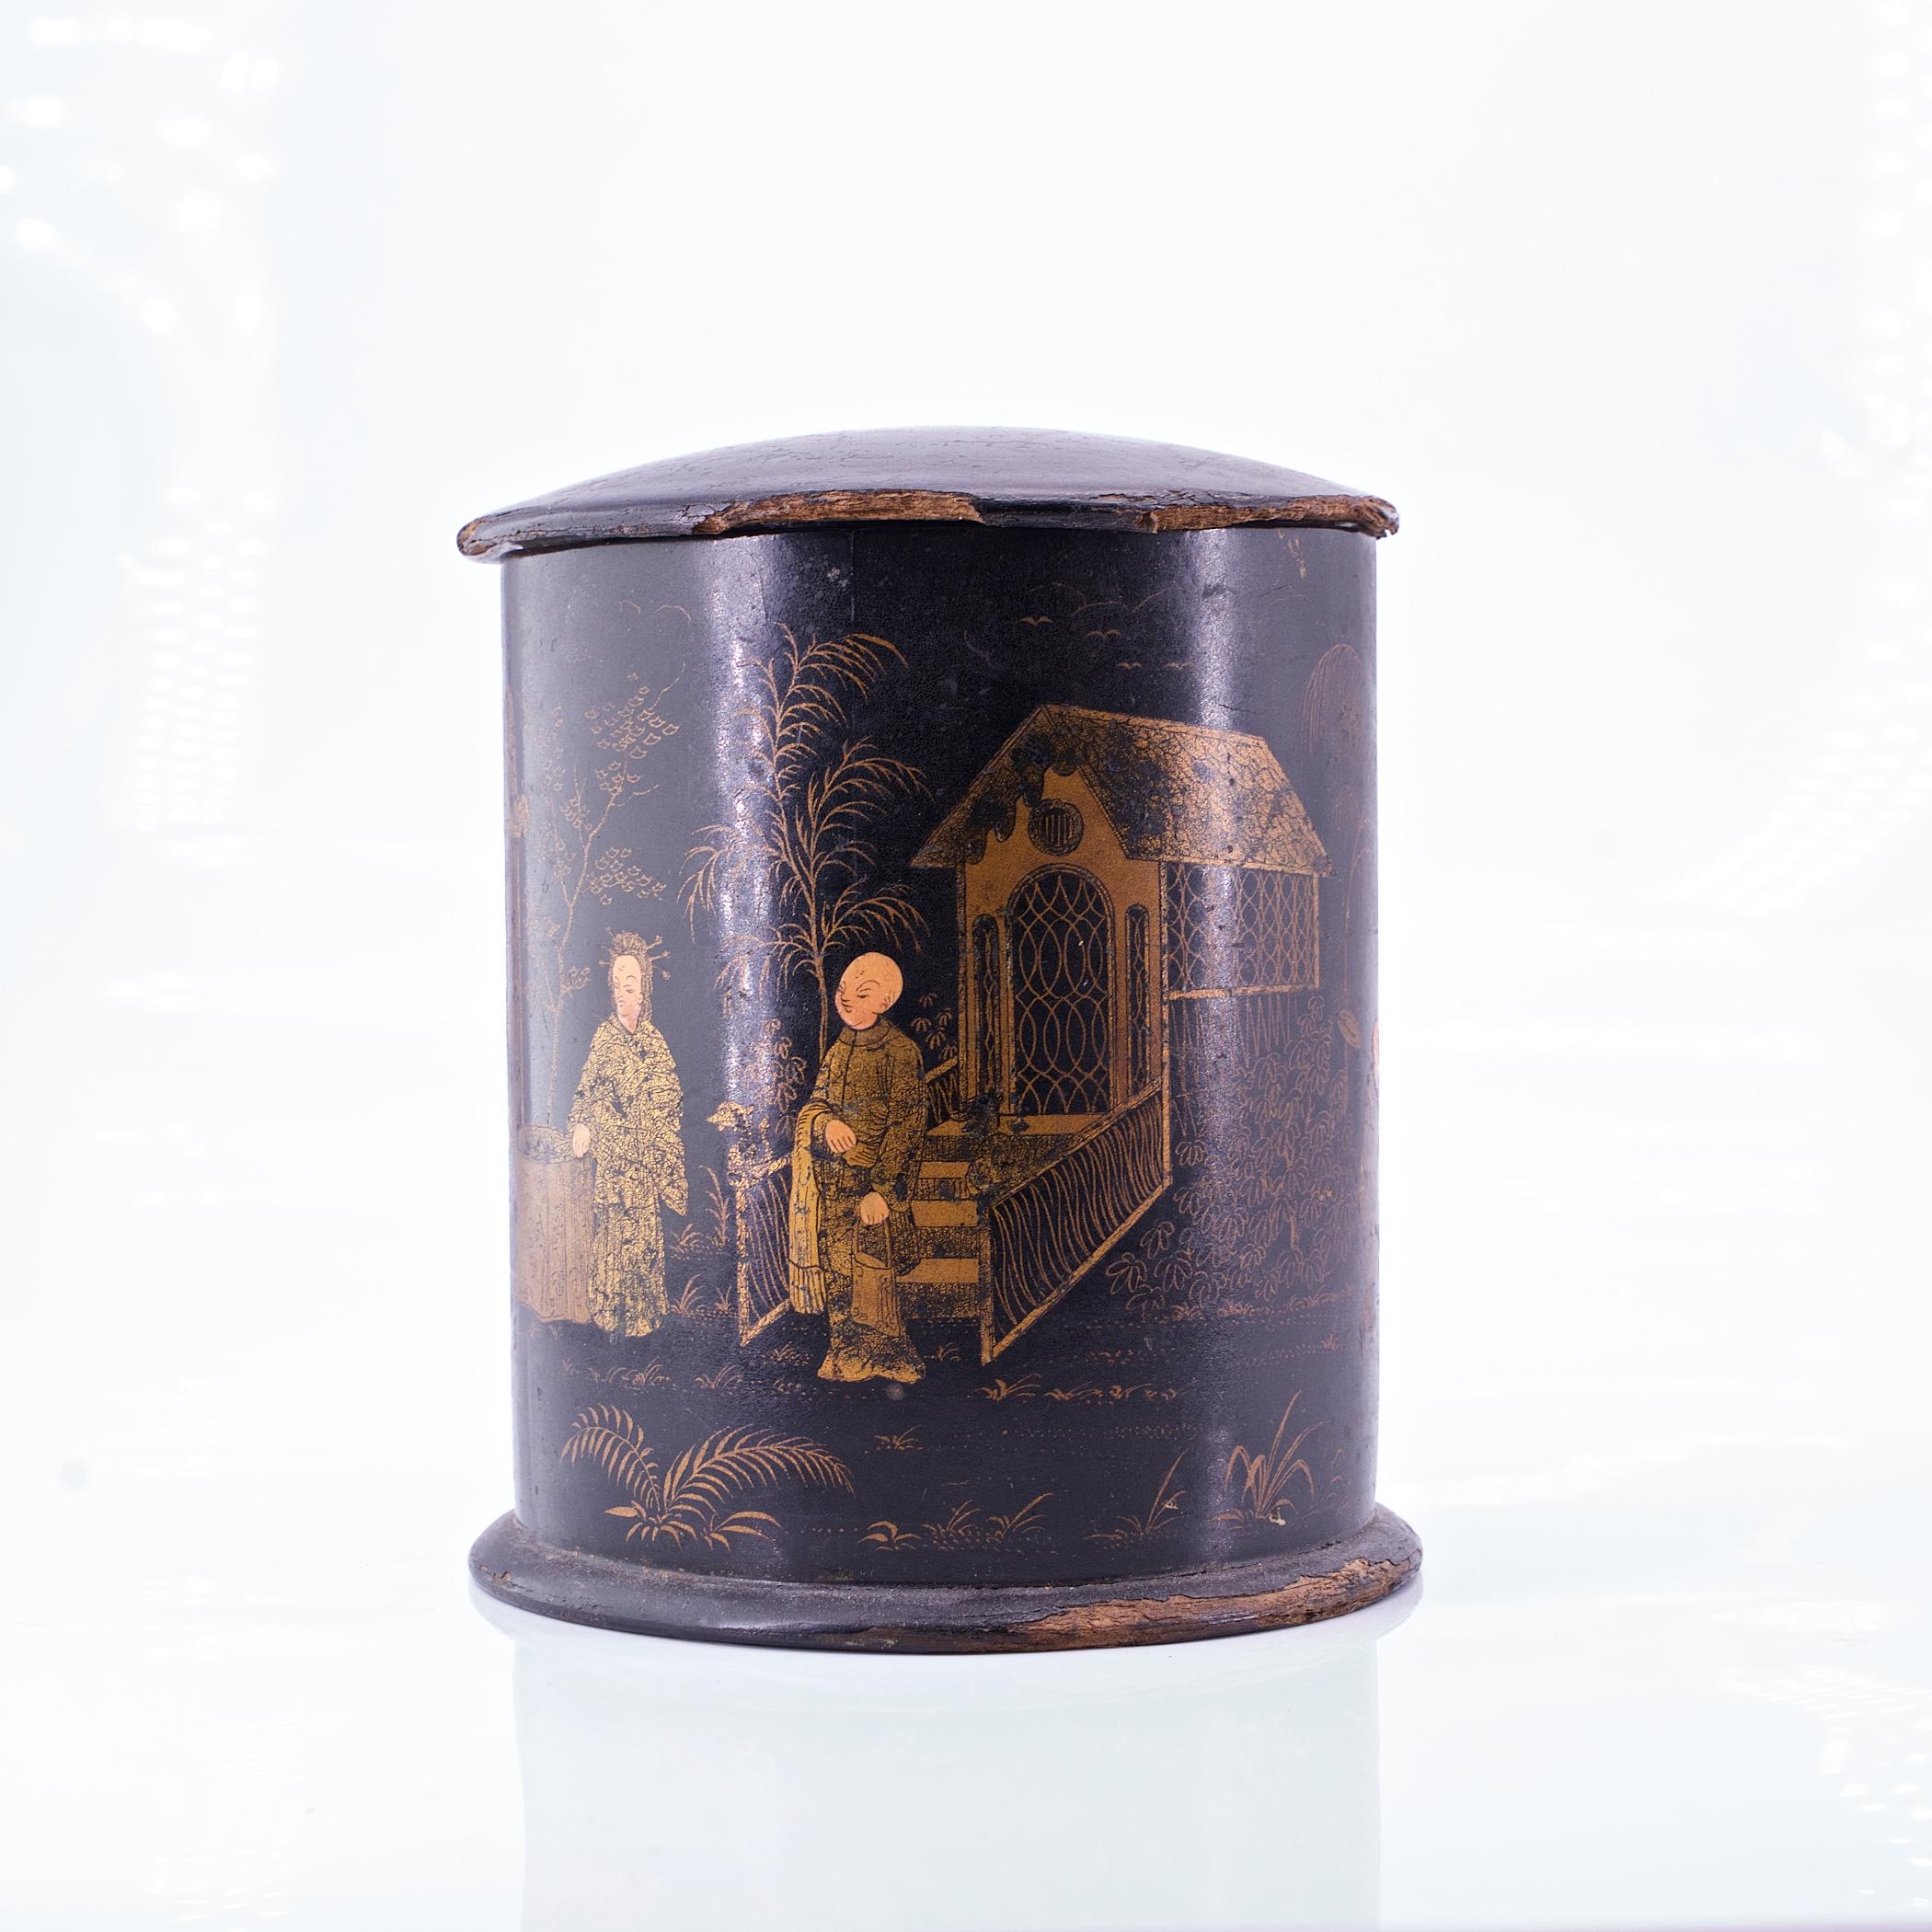 Aesthetic Movement 19th Century European Black Lacquered Chinoserie Painted Tea/Tobacco Caddy Jar For Sale